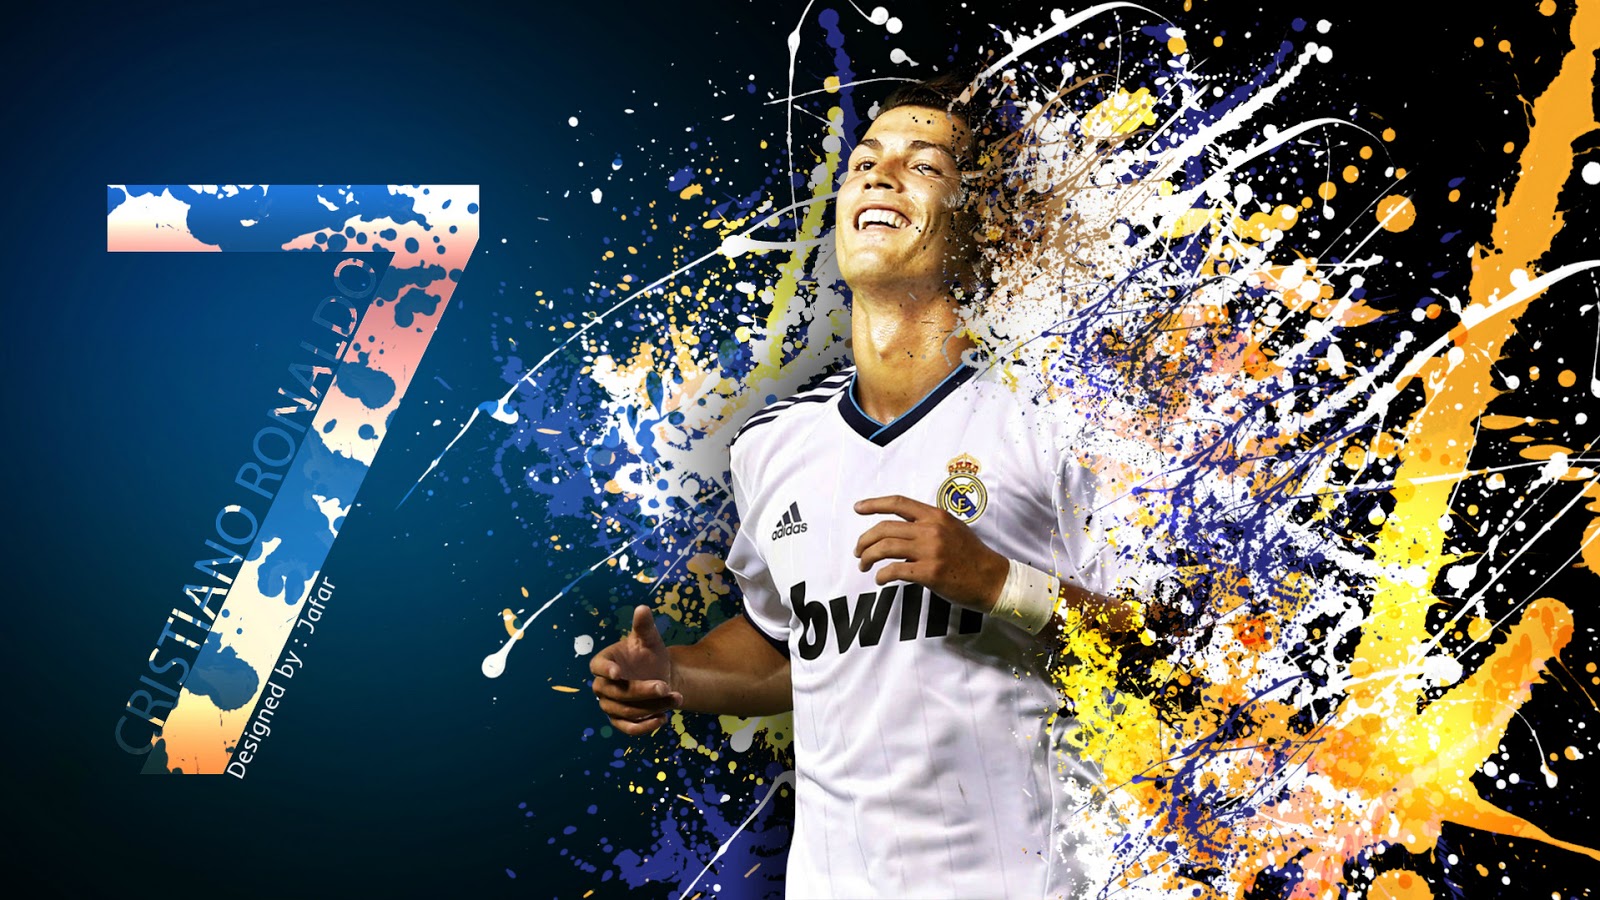 ALL SPORTS PLAYERS Cristiano Ronaldo hd Wallpapers 2013